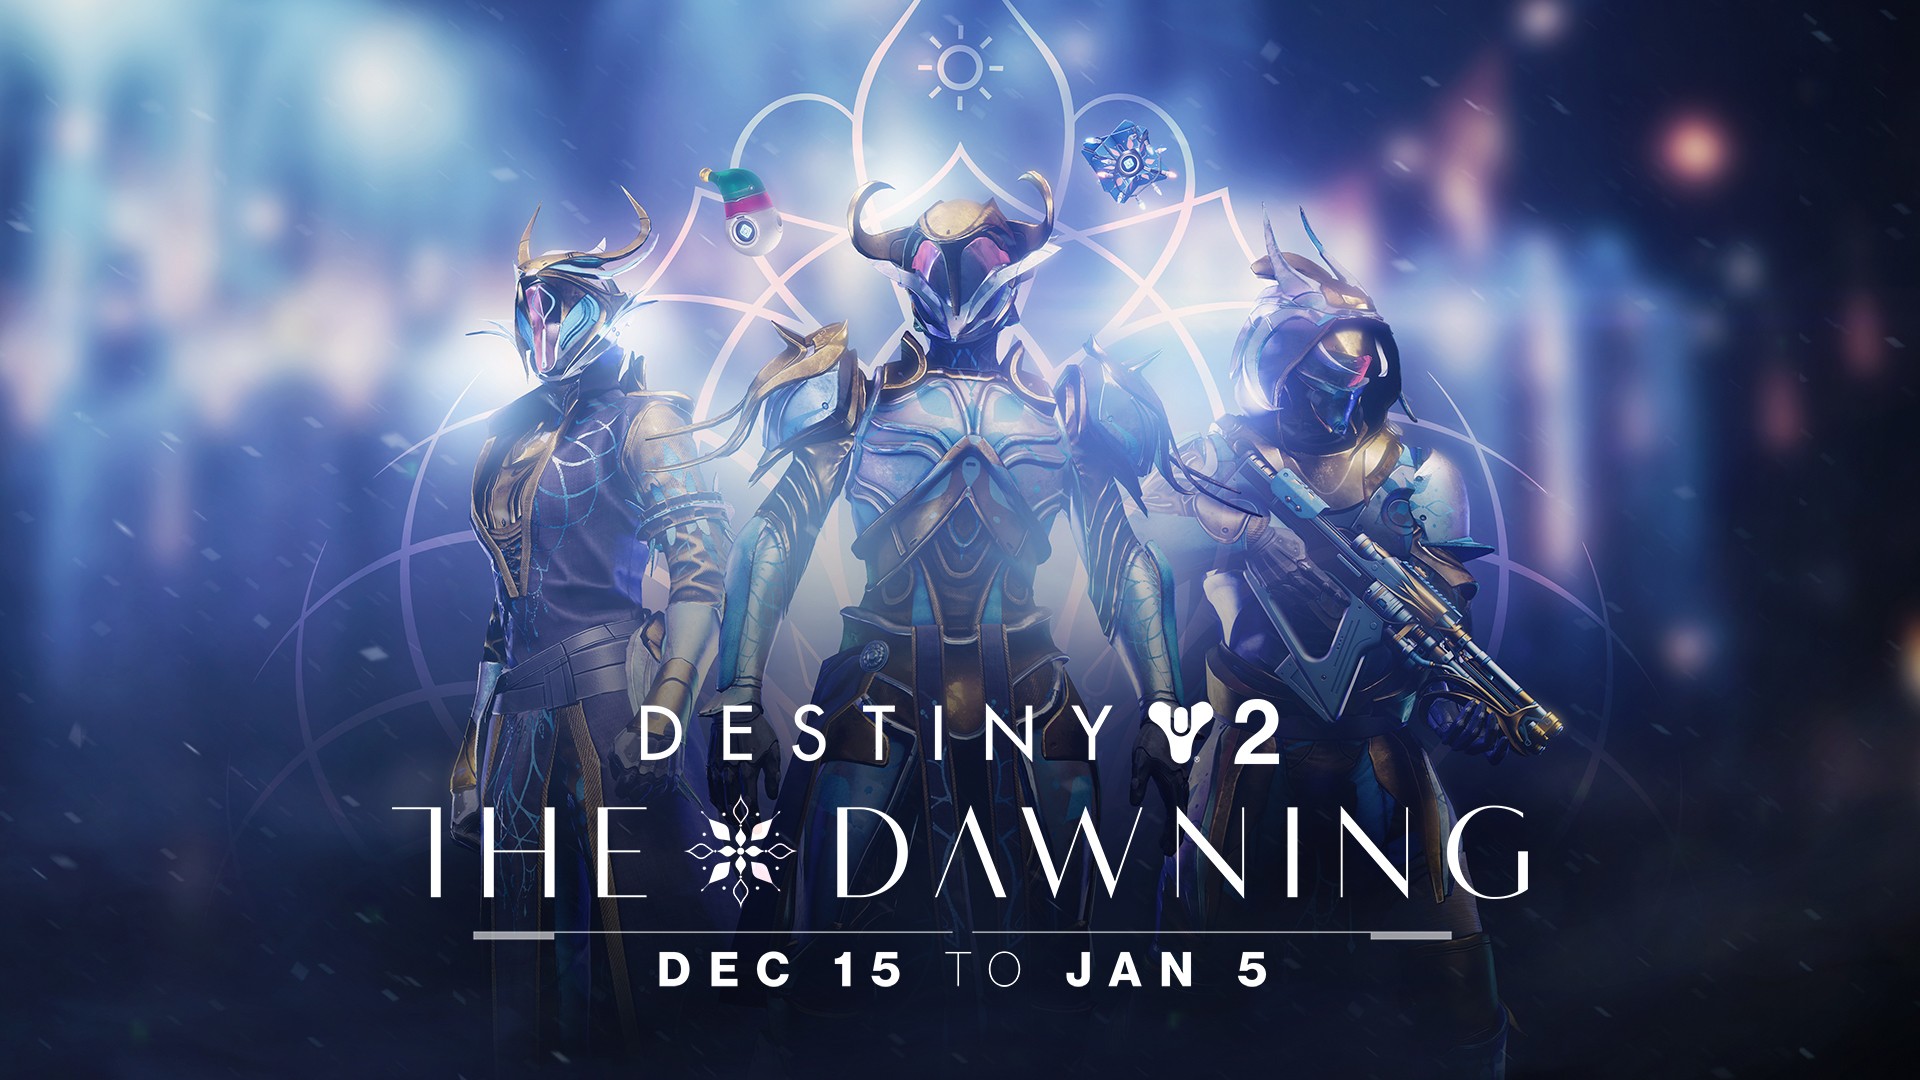 Spread Cheer, Get Gear: The Dawning Returns to Destiny 2 - Xbox Wire